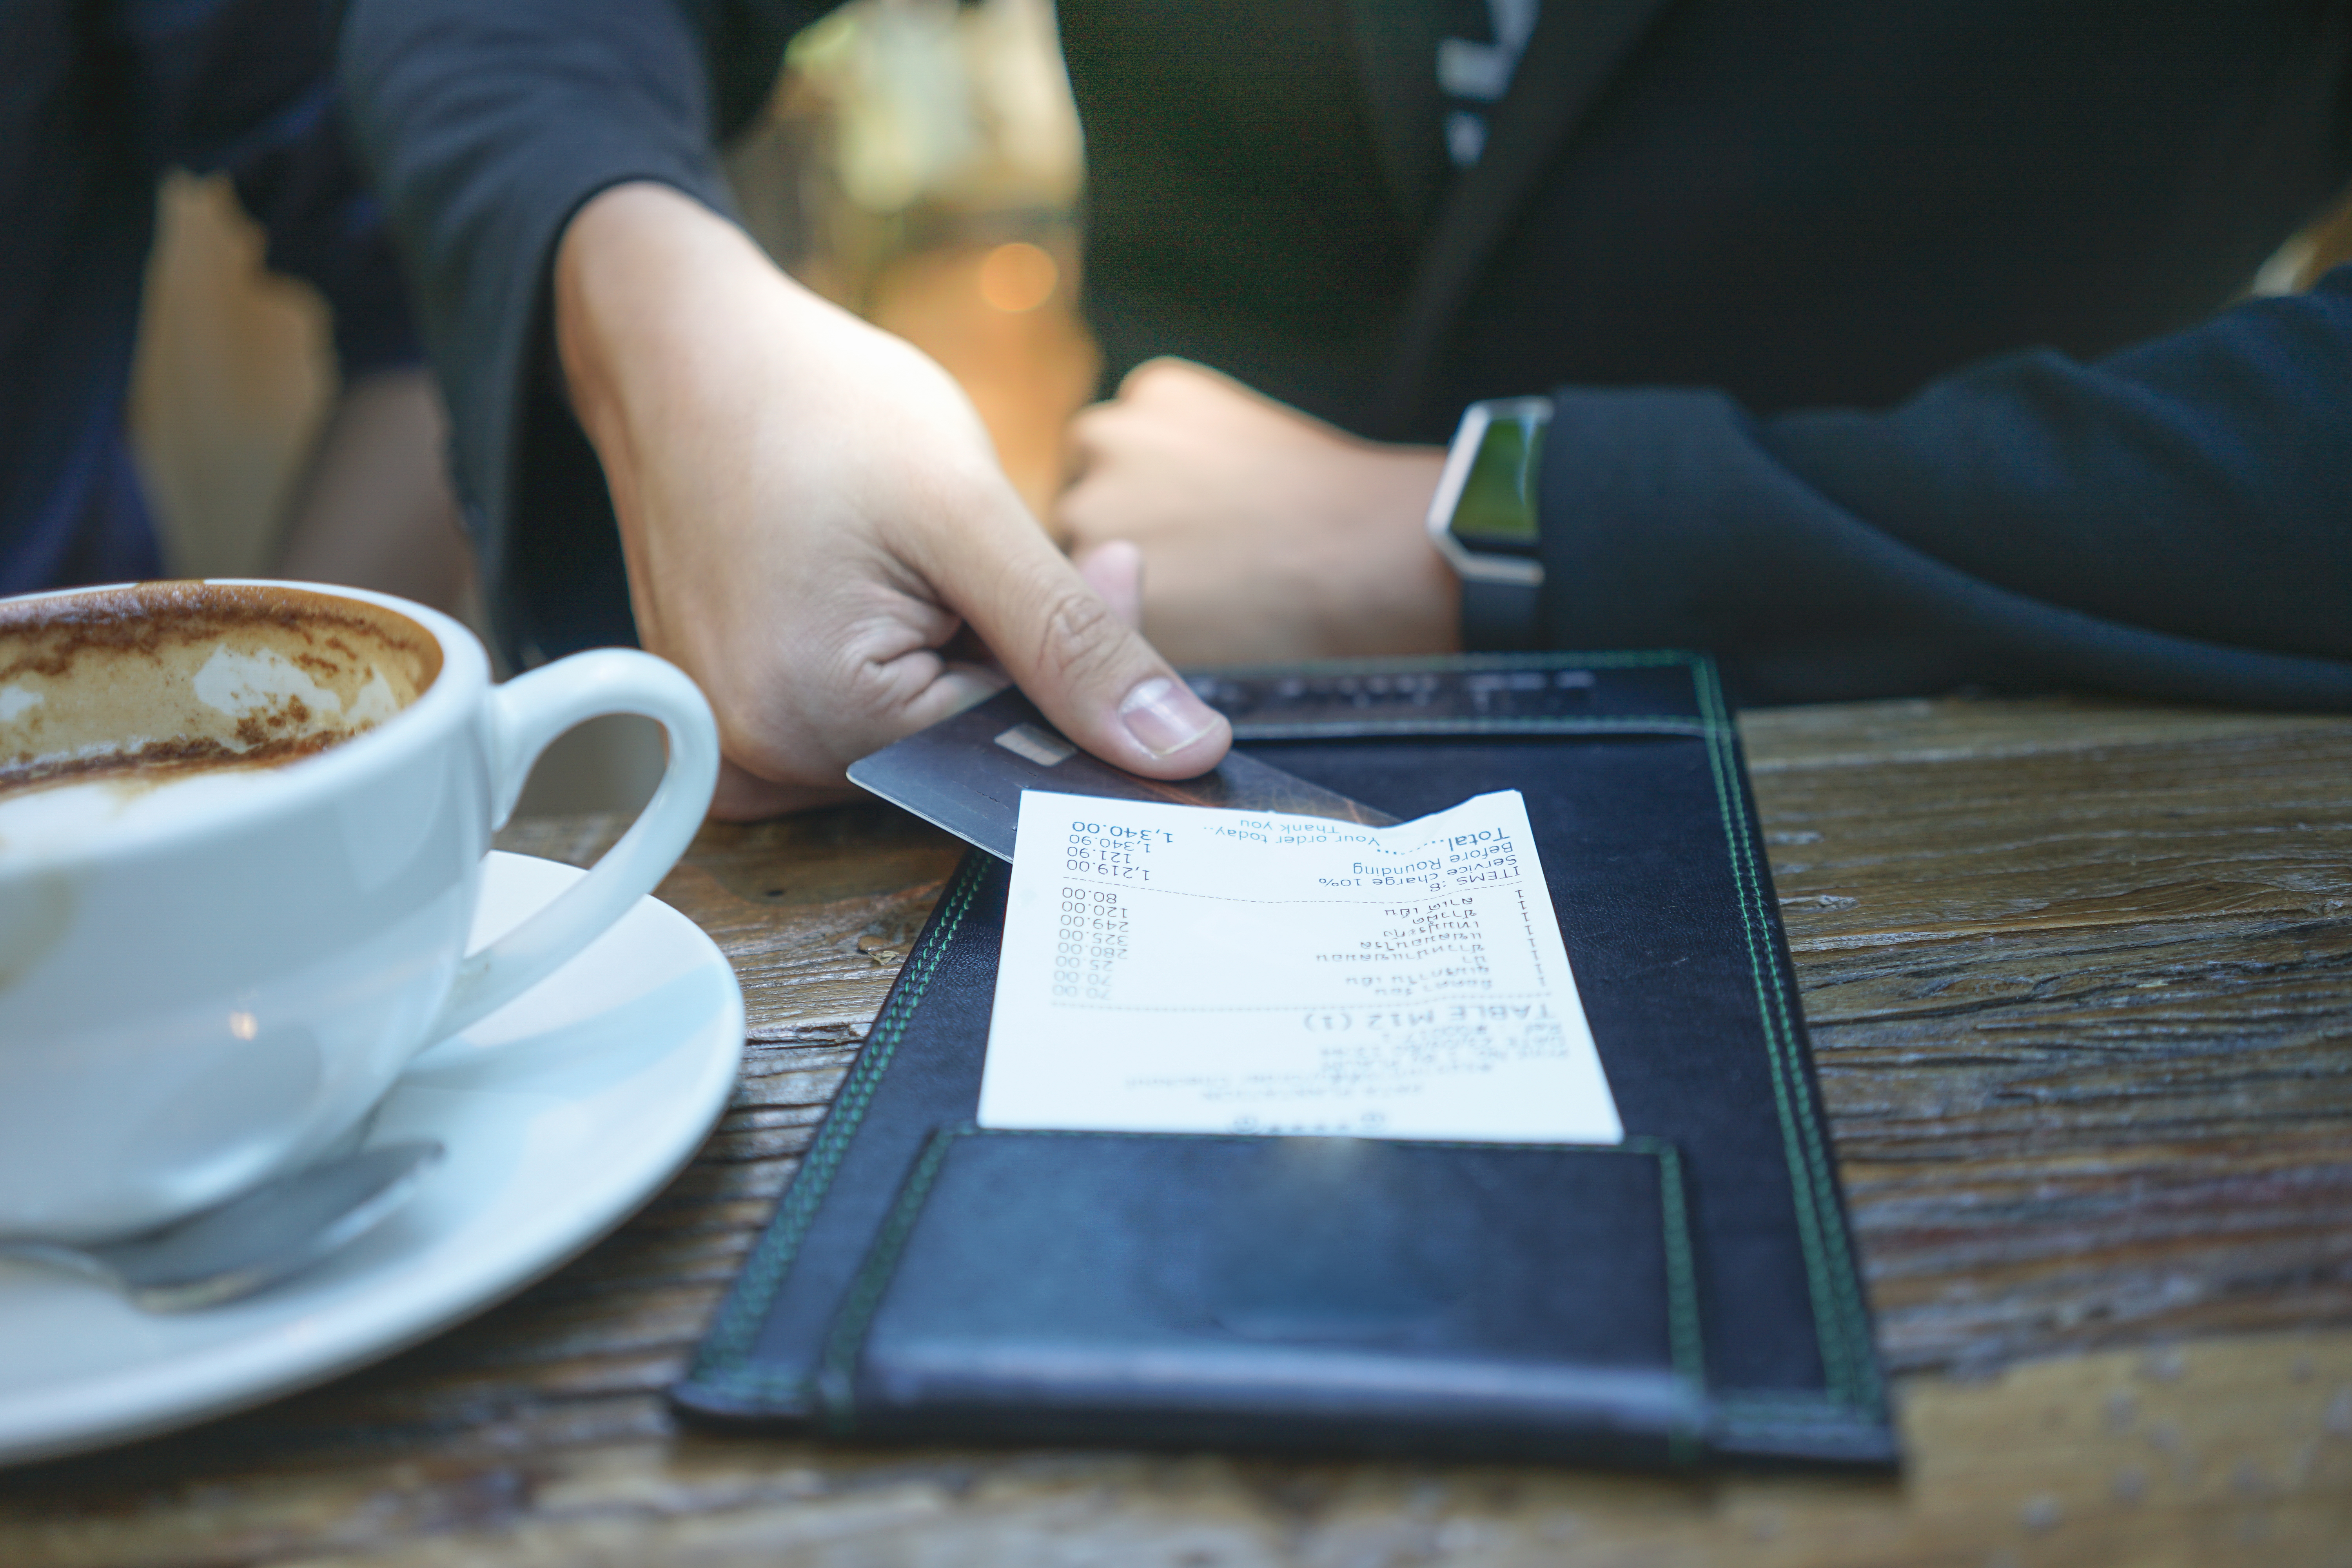 An image of a pair of hands holding a restaurant check.